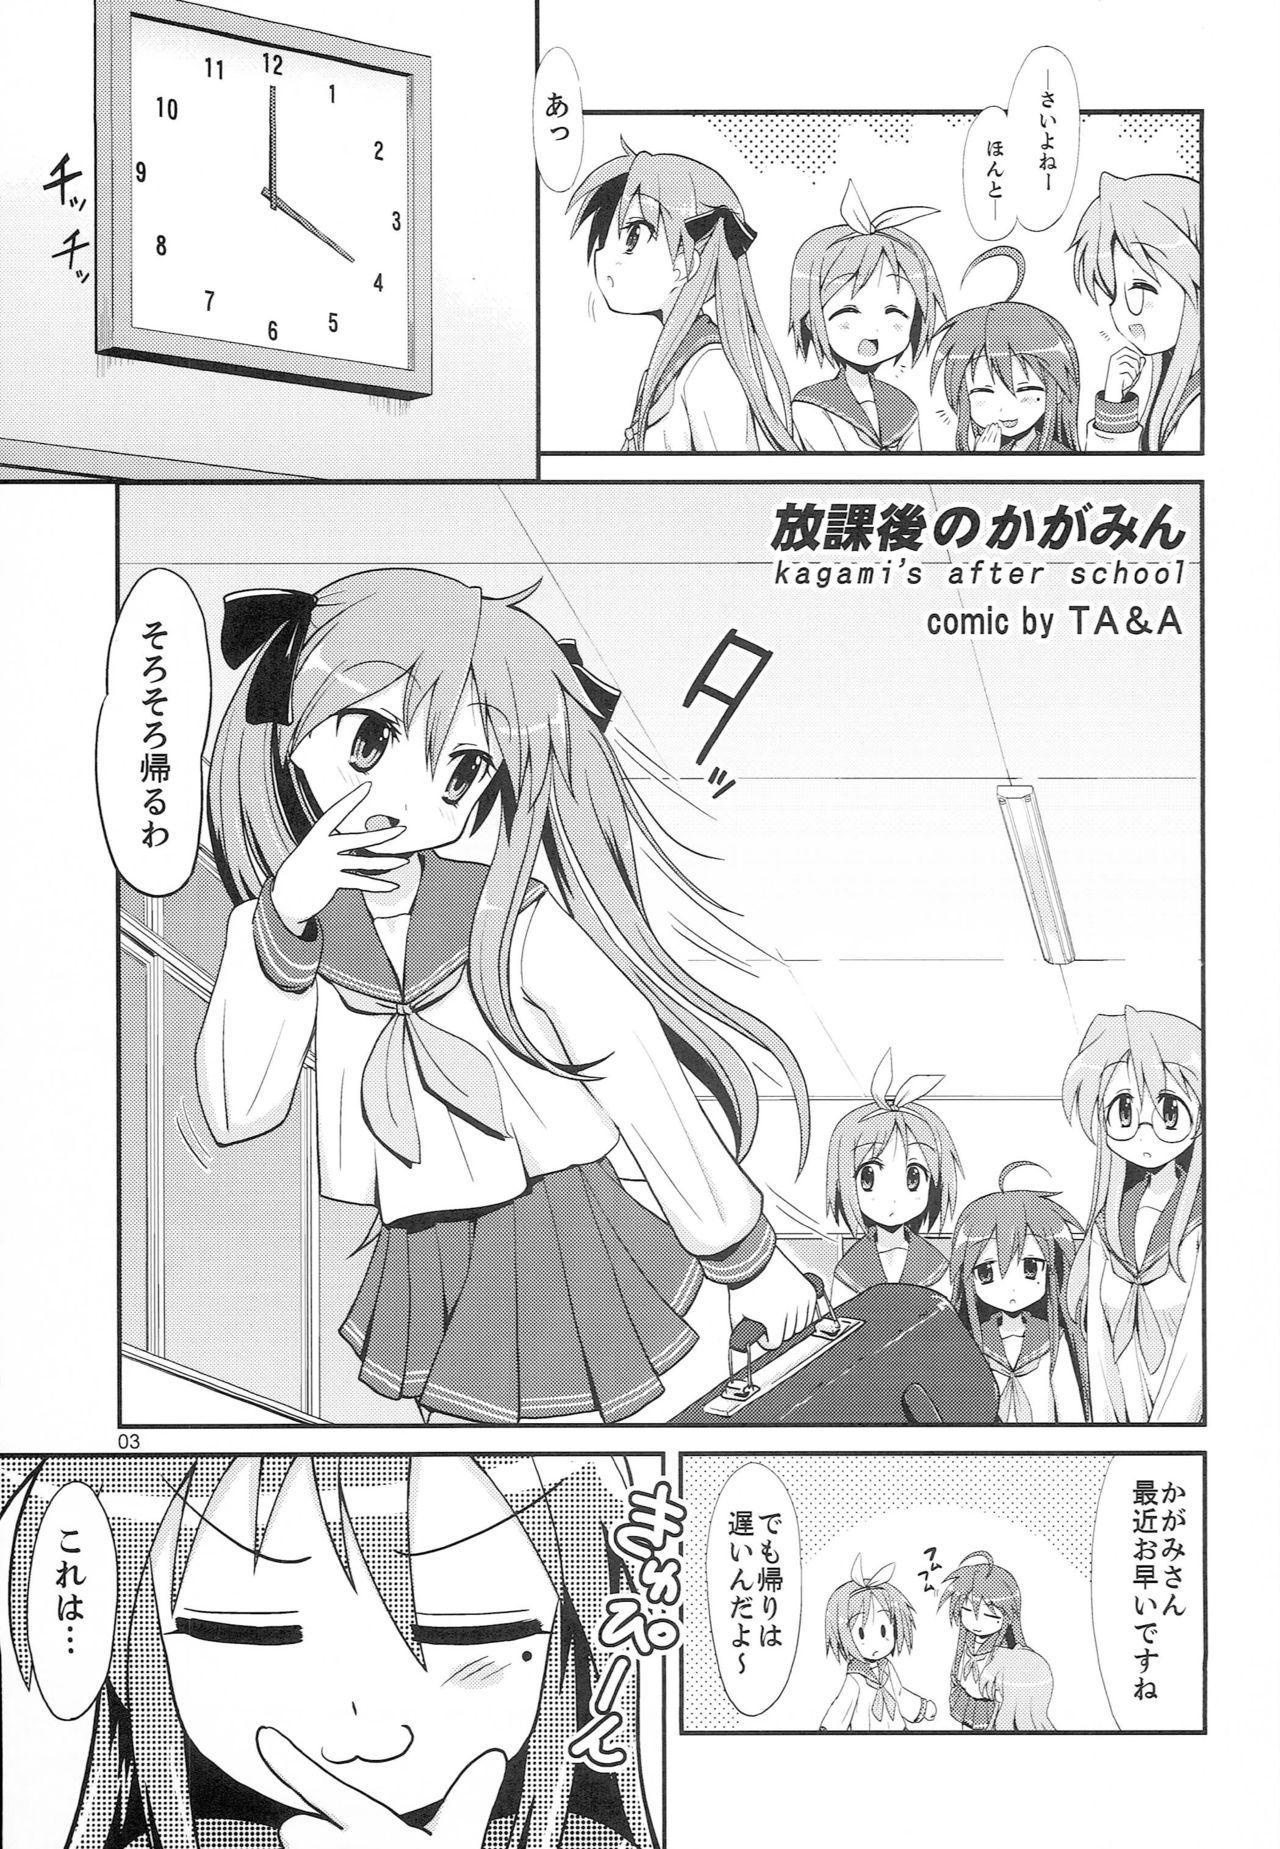 Perra Houkago no Kagamin - Lucky star Highheels - Page 2